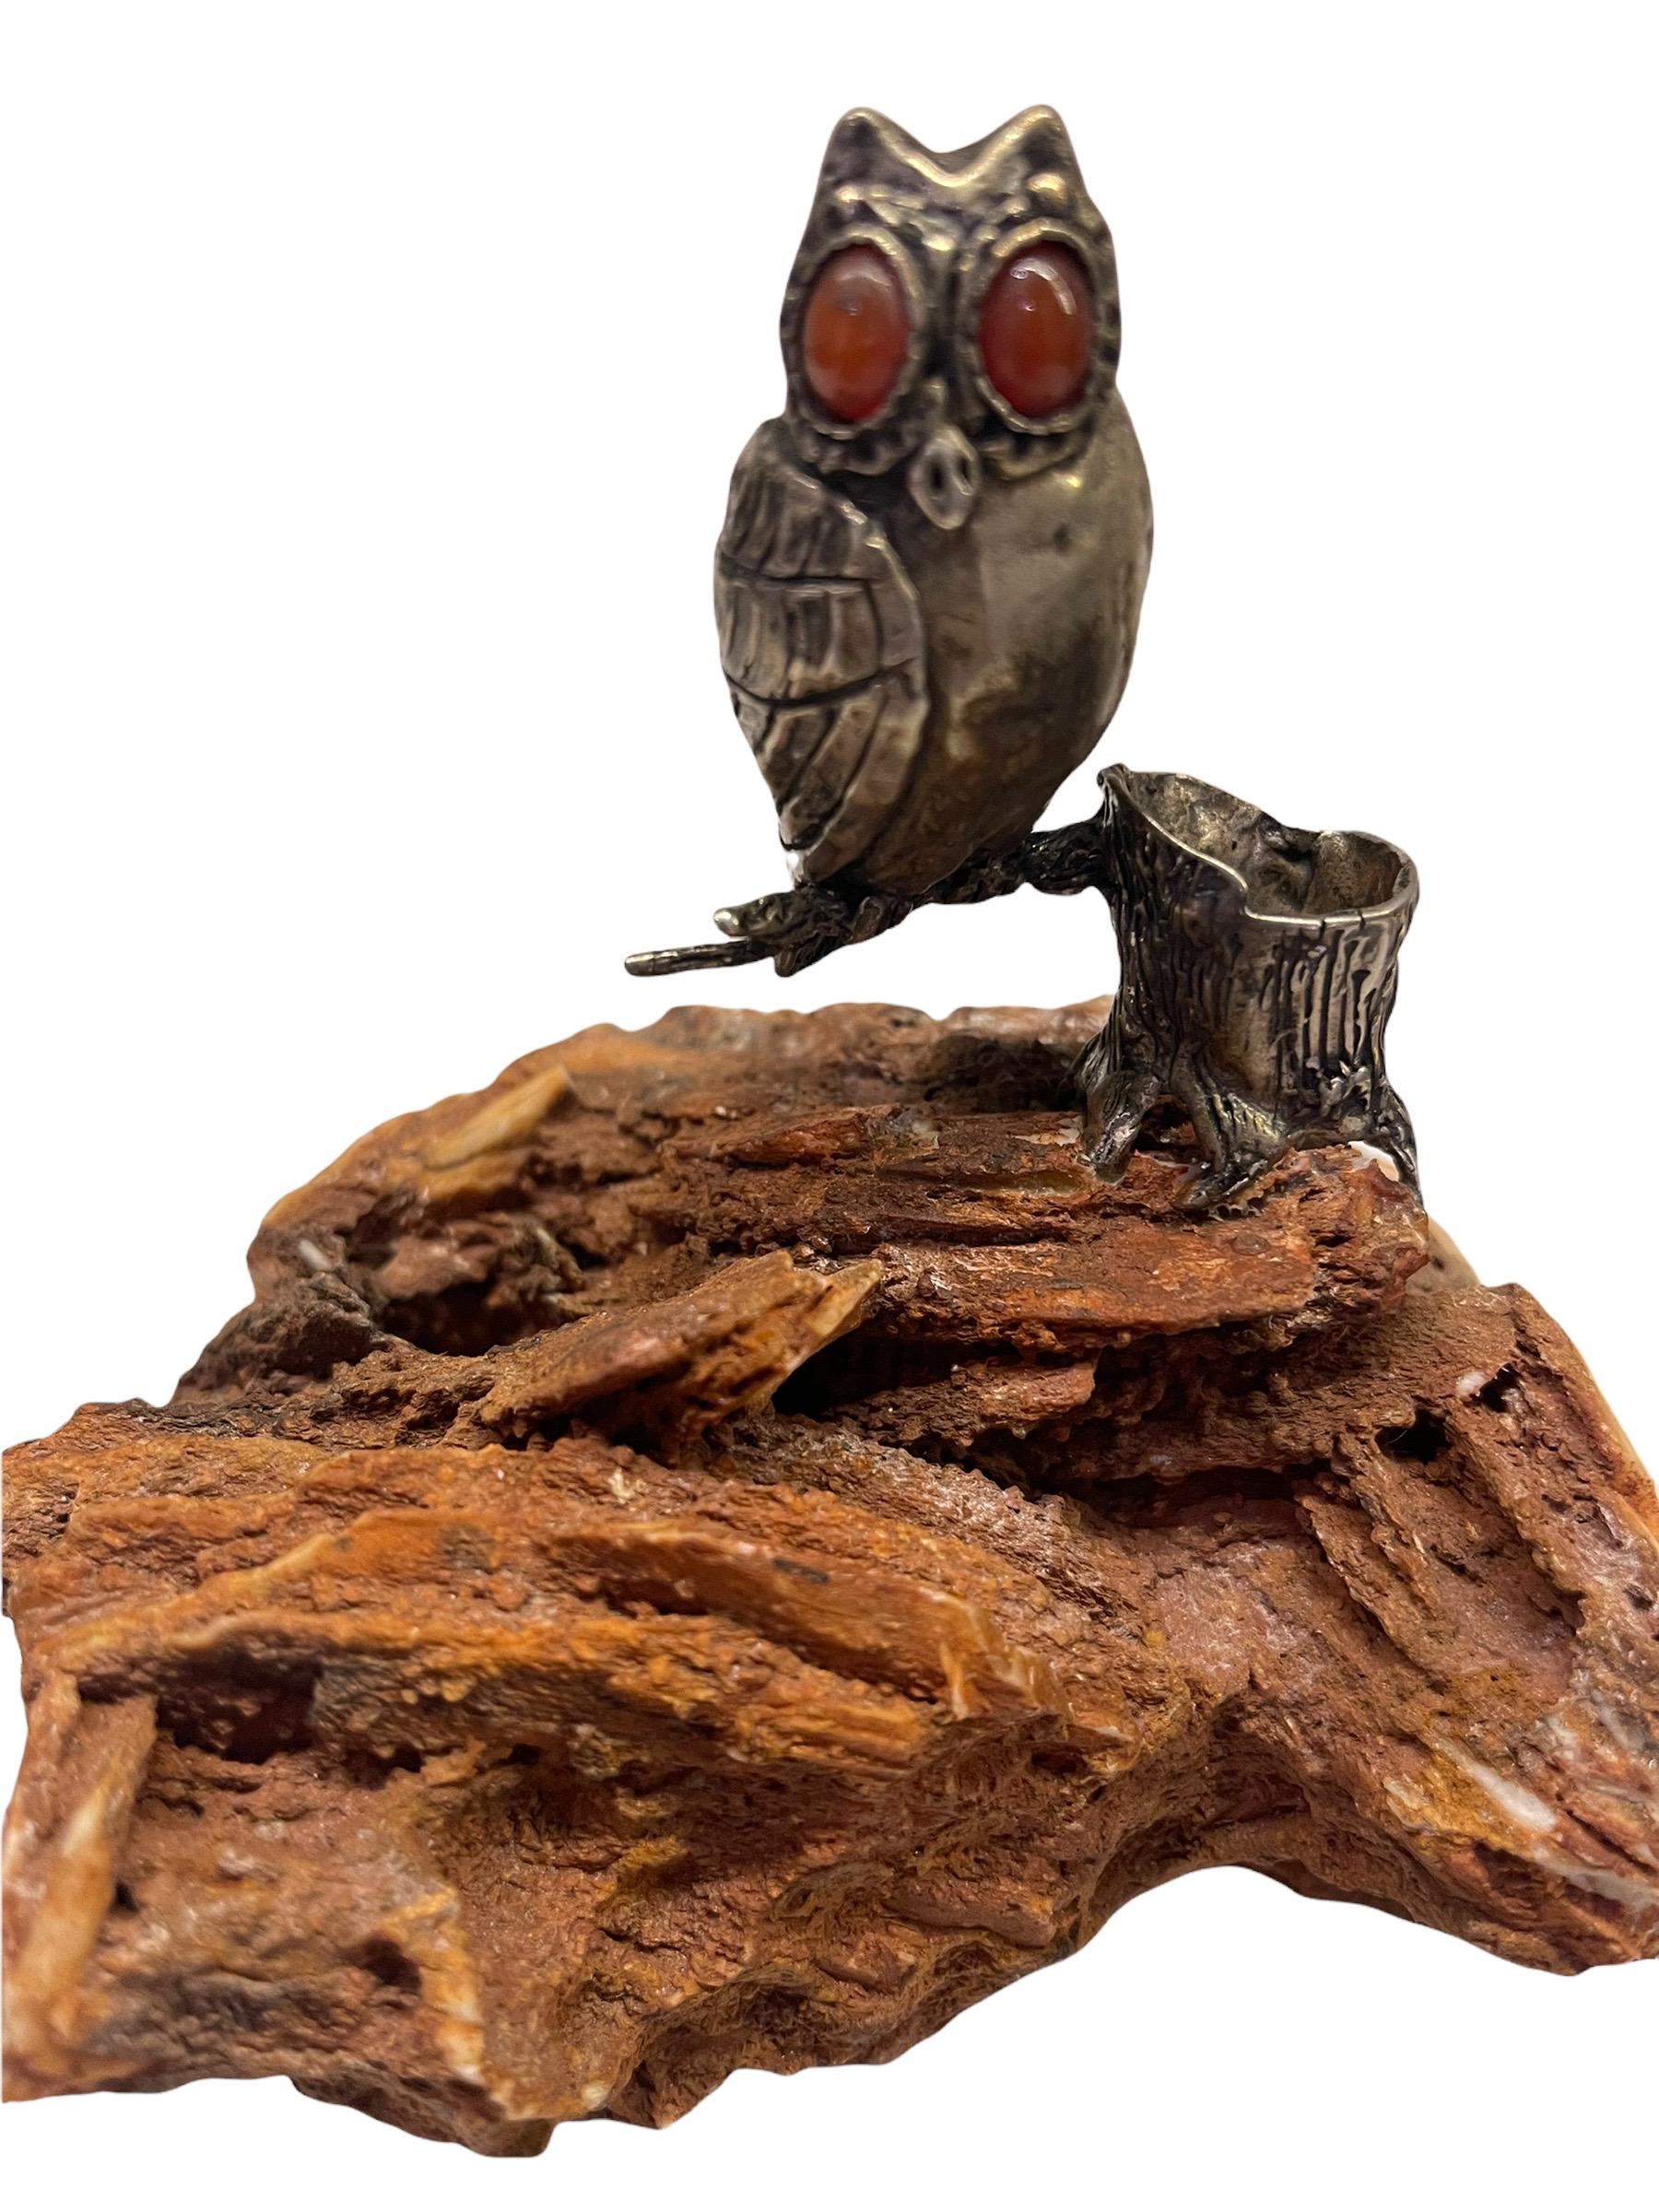 20th Century Cartier Sterling silver owl figurine perched on a trunk. It is marked on a silver plaque and mounted on a specimen of orange Creedite Mineral. The eyes of the owl are made of Malachite stone.